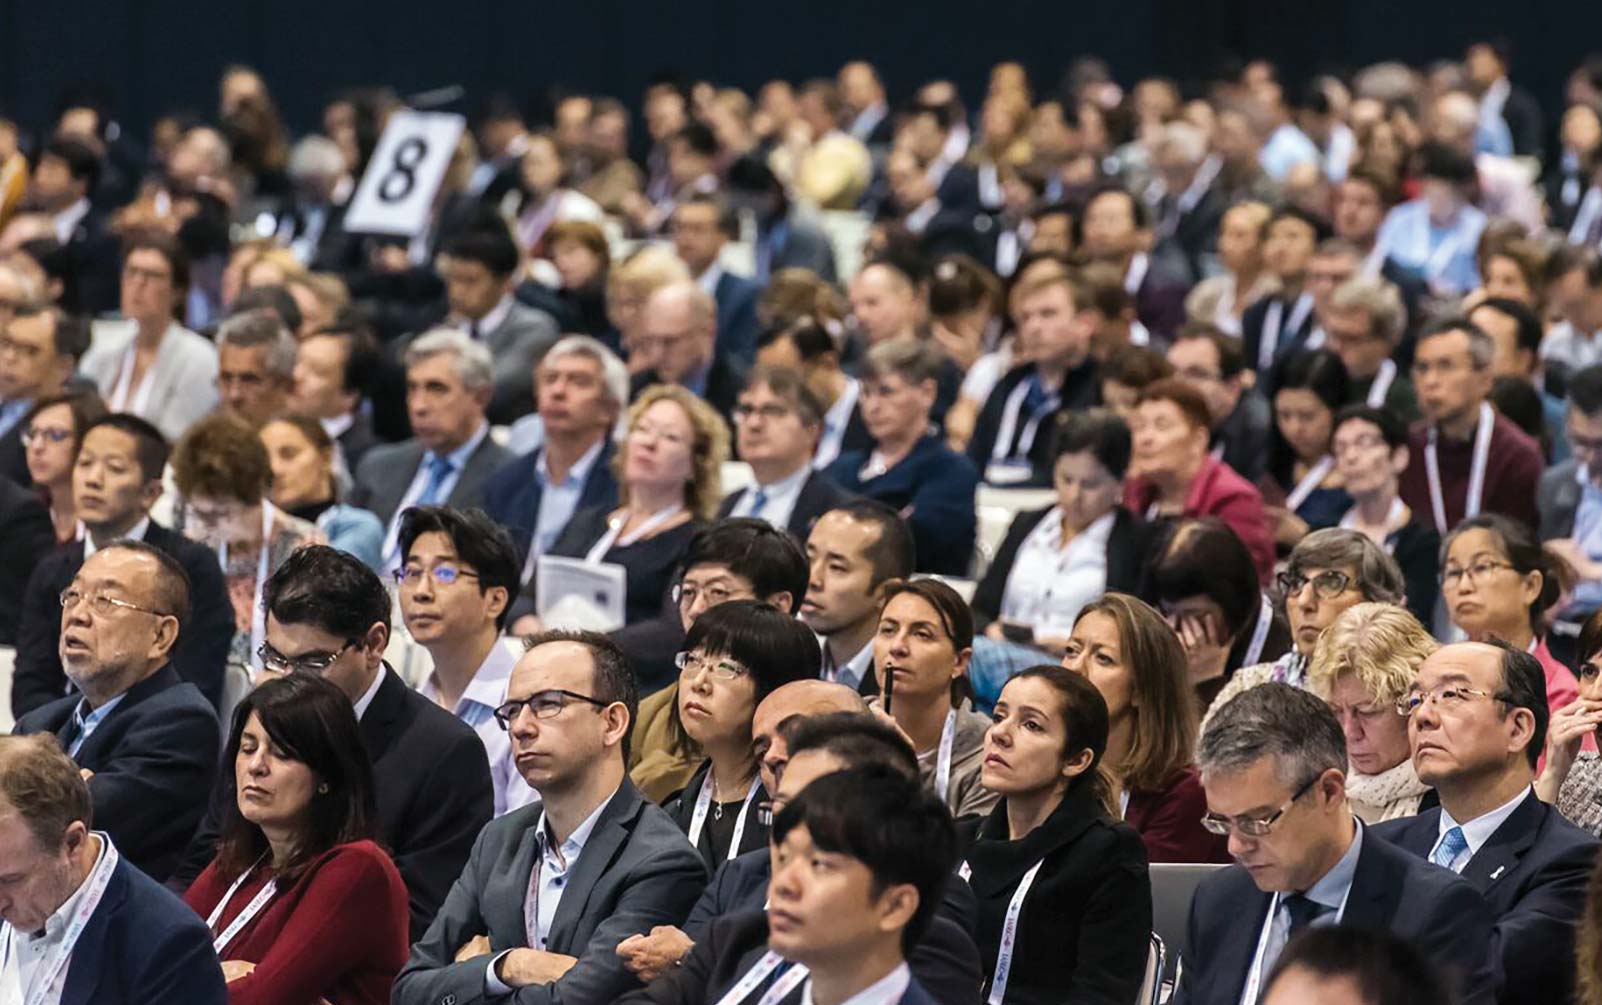 WCLC Plenary Symposia to Include Practice-Changing Research Presentations